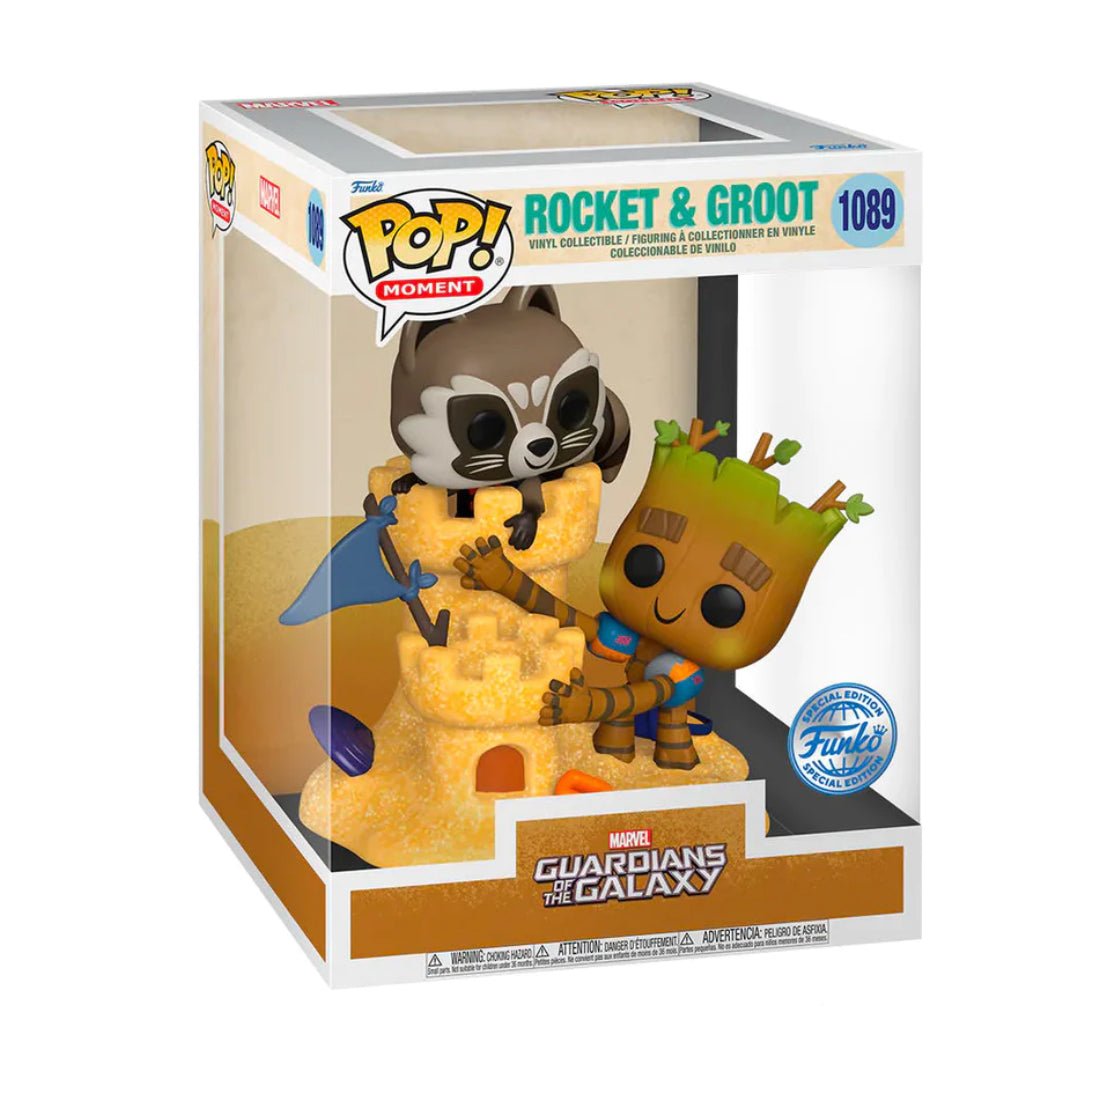 Funko Pop! Moment: Guardians of the Galaxy - Rocket and Groot #1089 (Exclusive) - دمية - Store 974 | ستور ٩٧٤